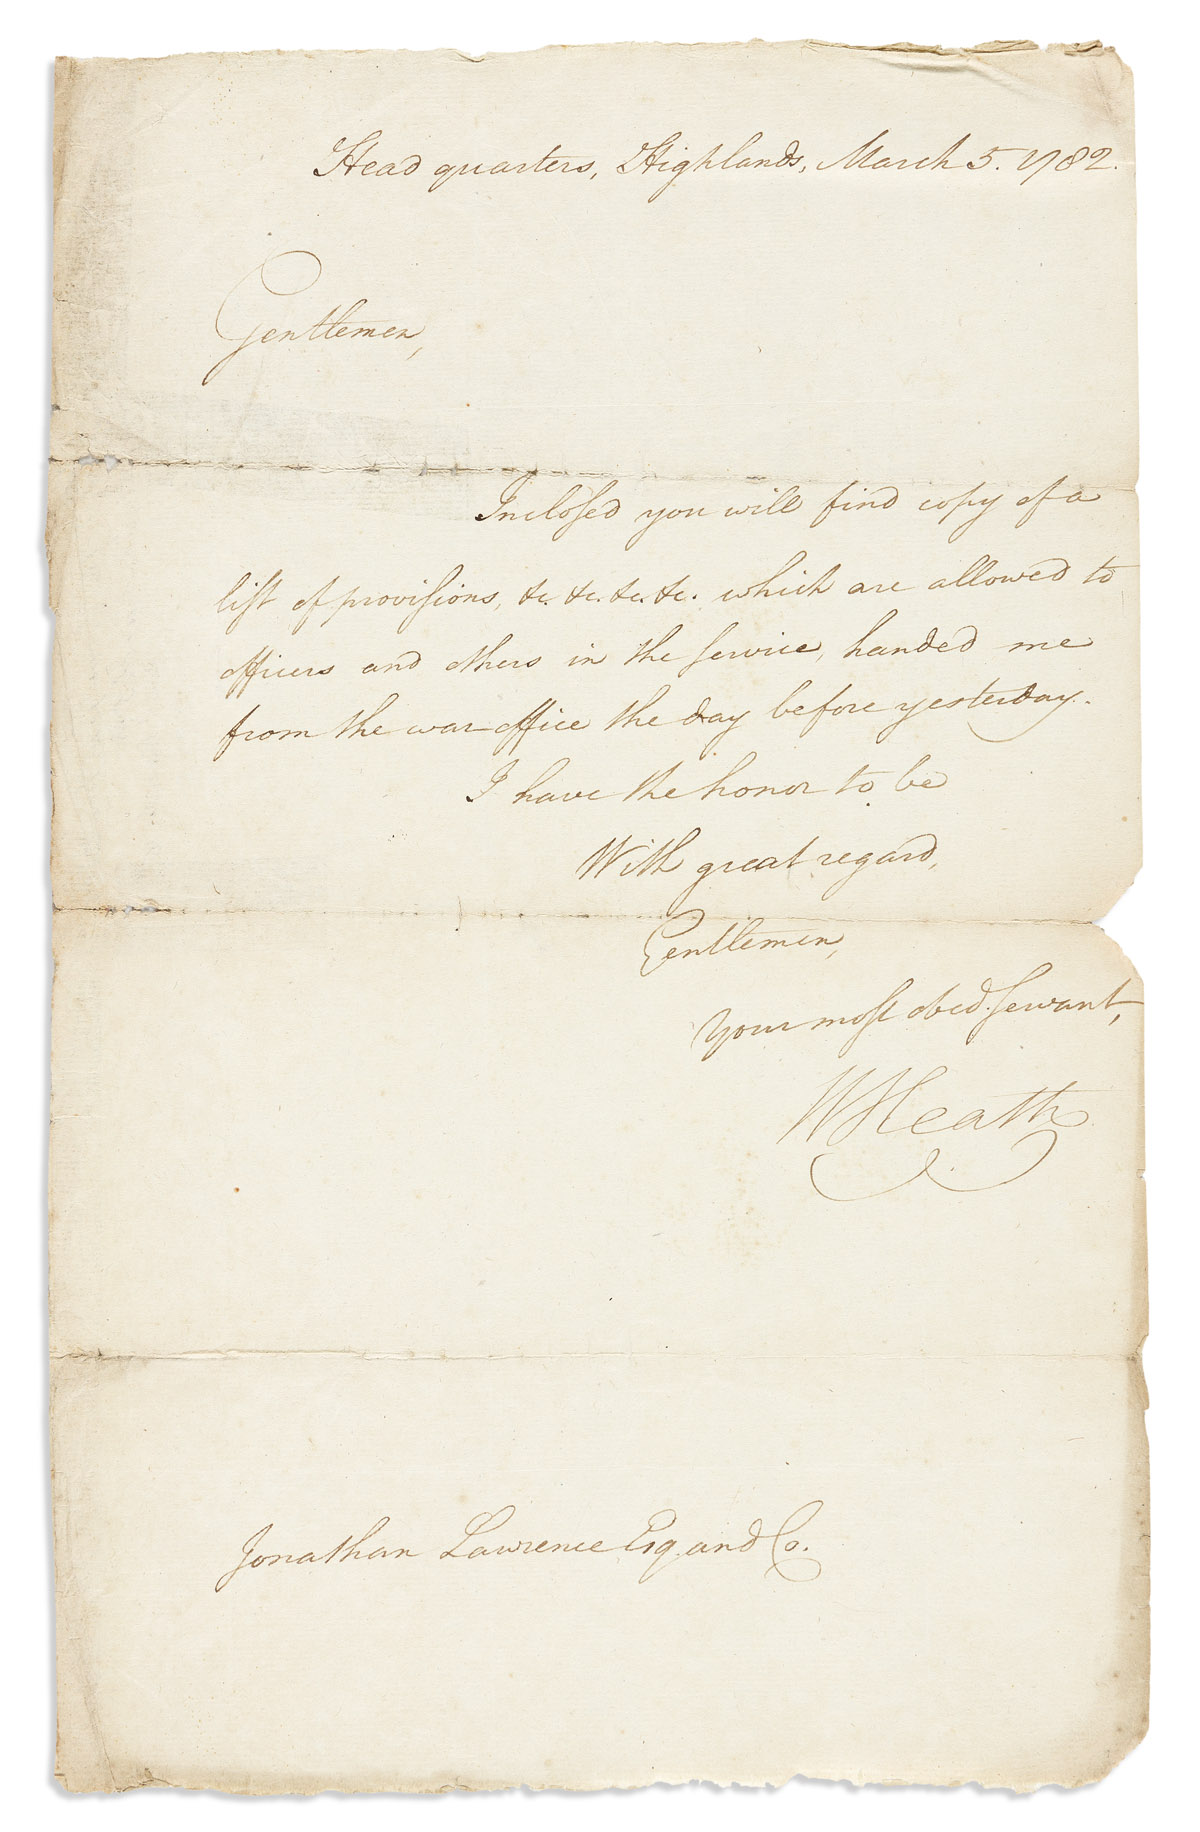 (REVOLUTIONARY WAR.) HEATH, WILLIAM. Brief Letter Signed, WHeath, to Jonathan Lawrence and Co.: